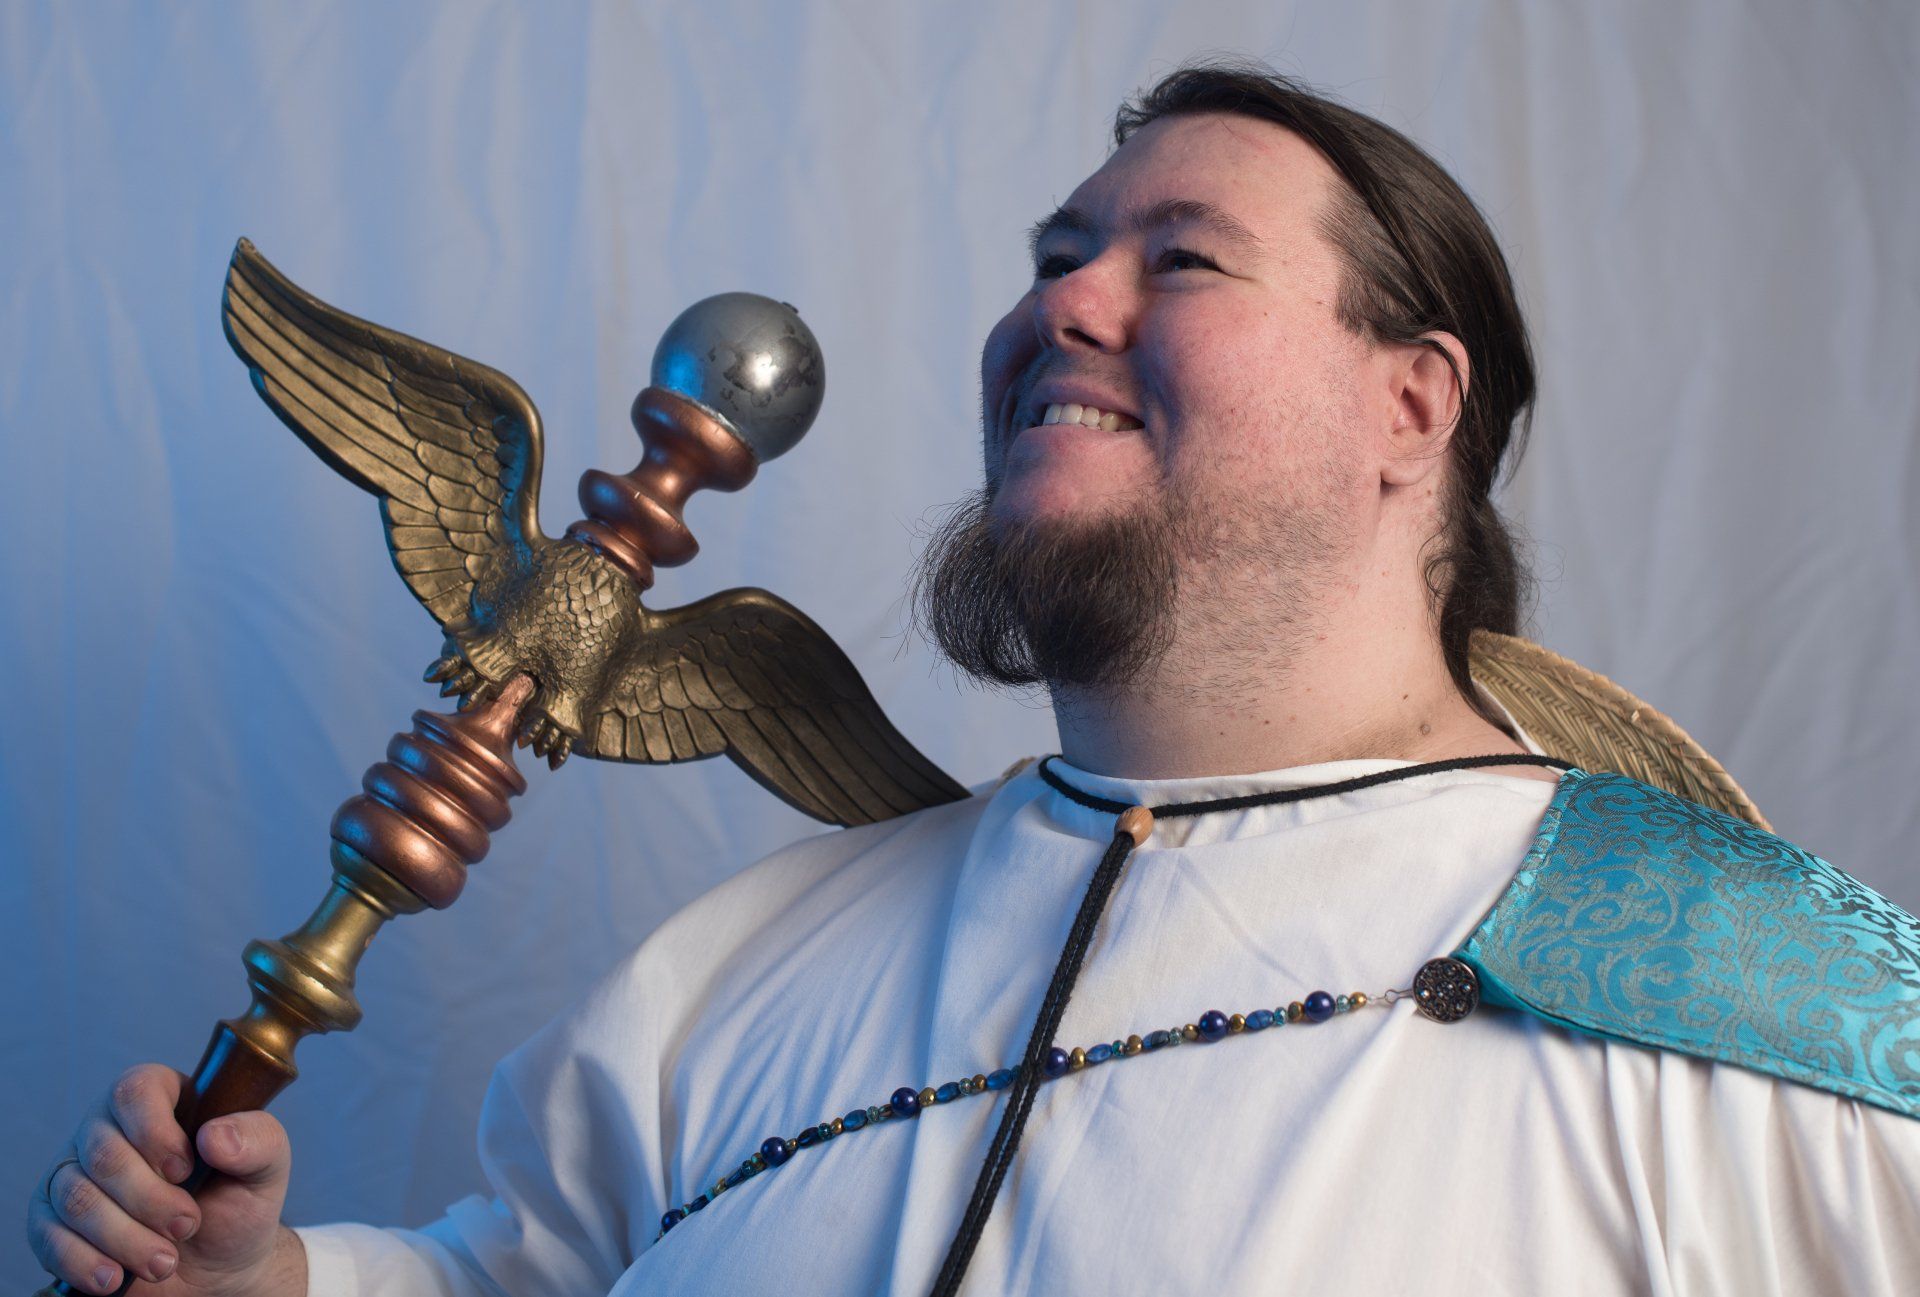 A man with a beard is holding a staff with wings, representing Hermes.